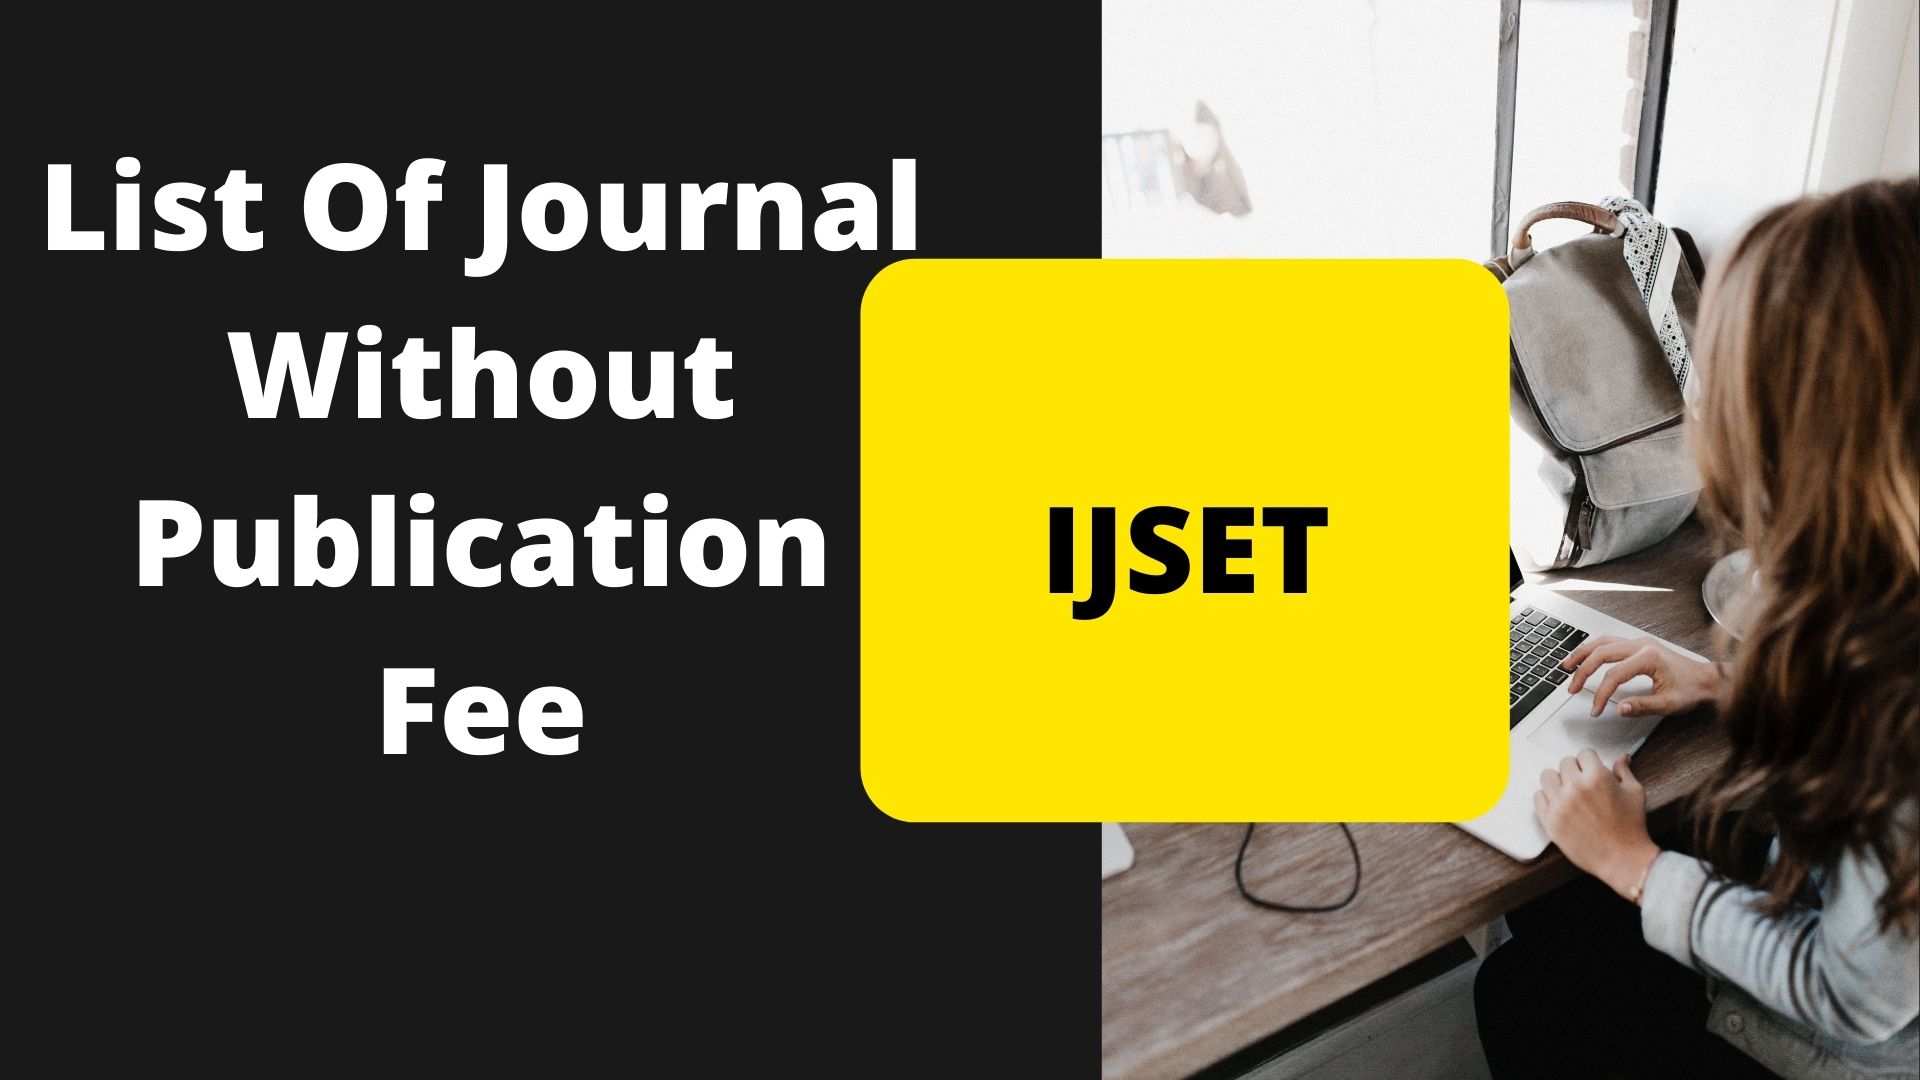 How do I find a journal without a publication fee?